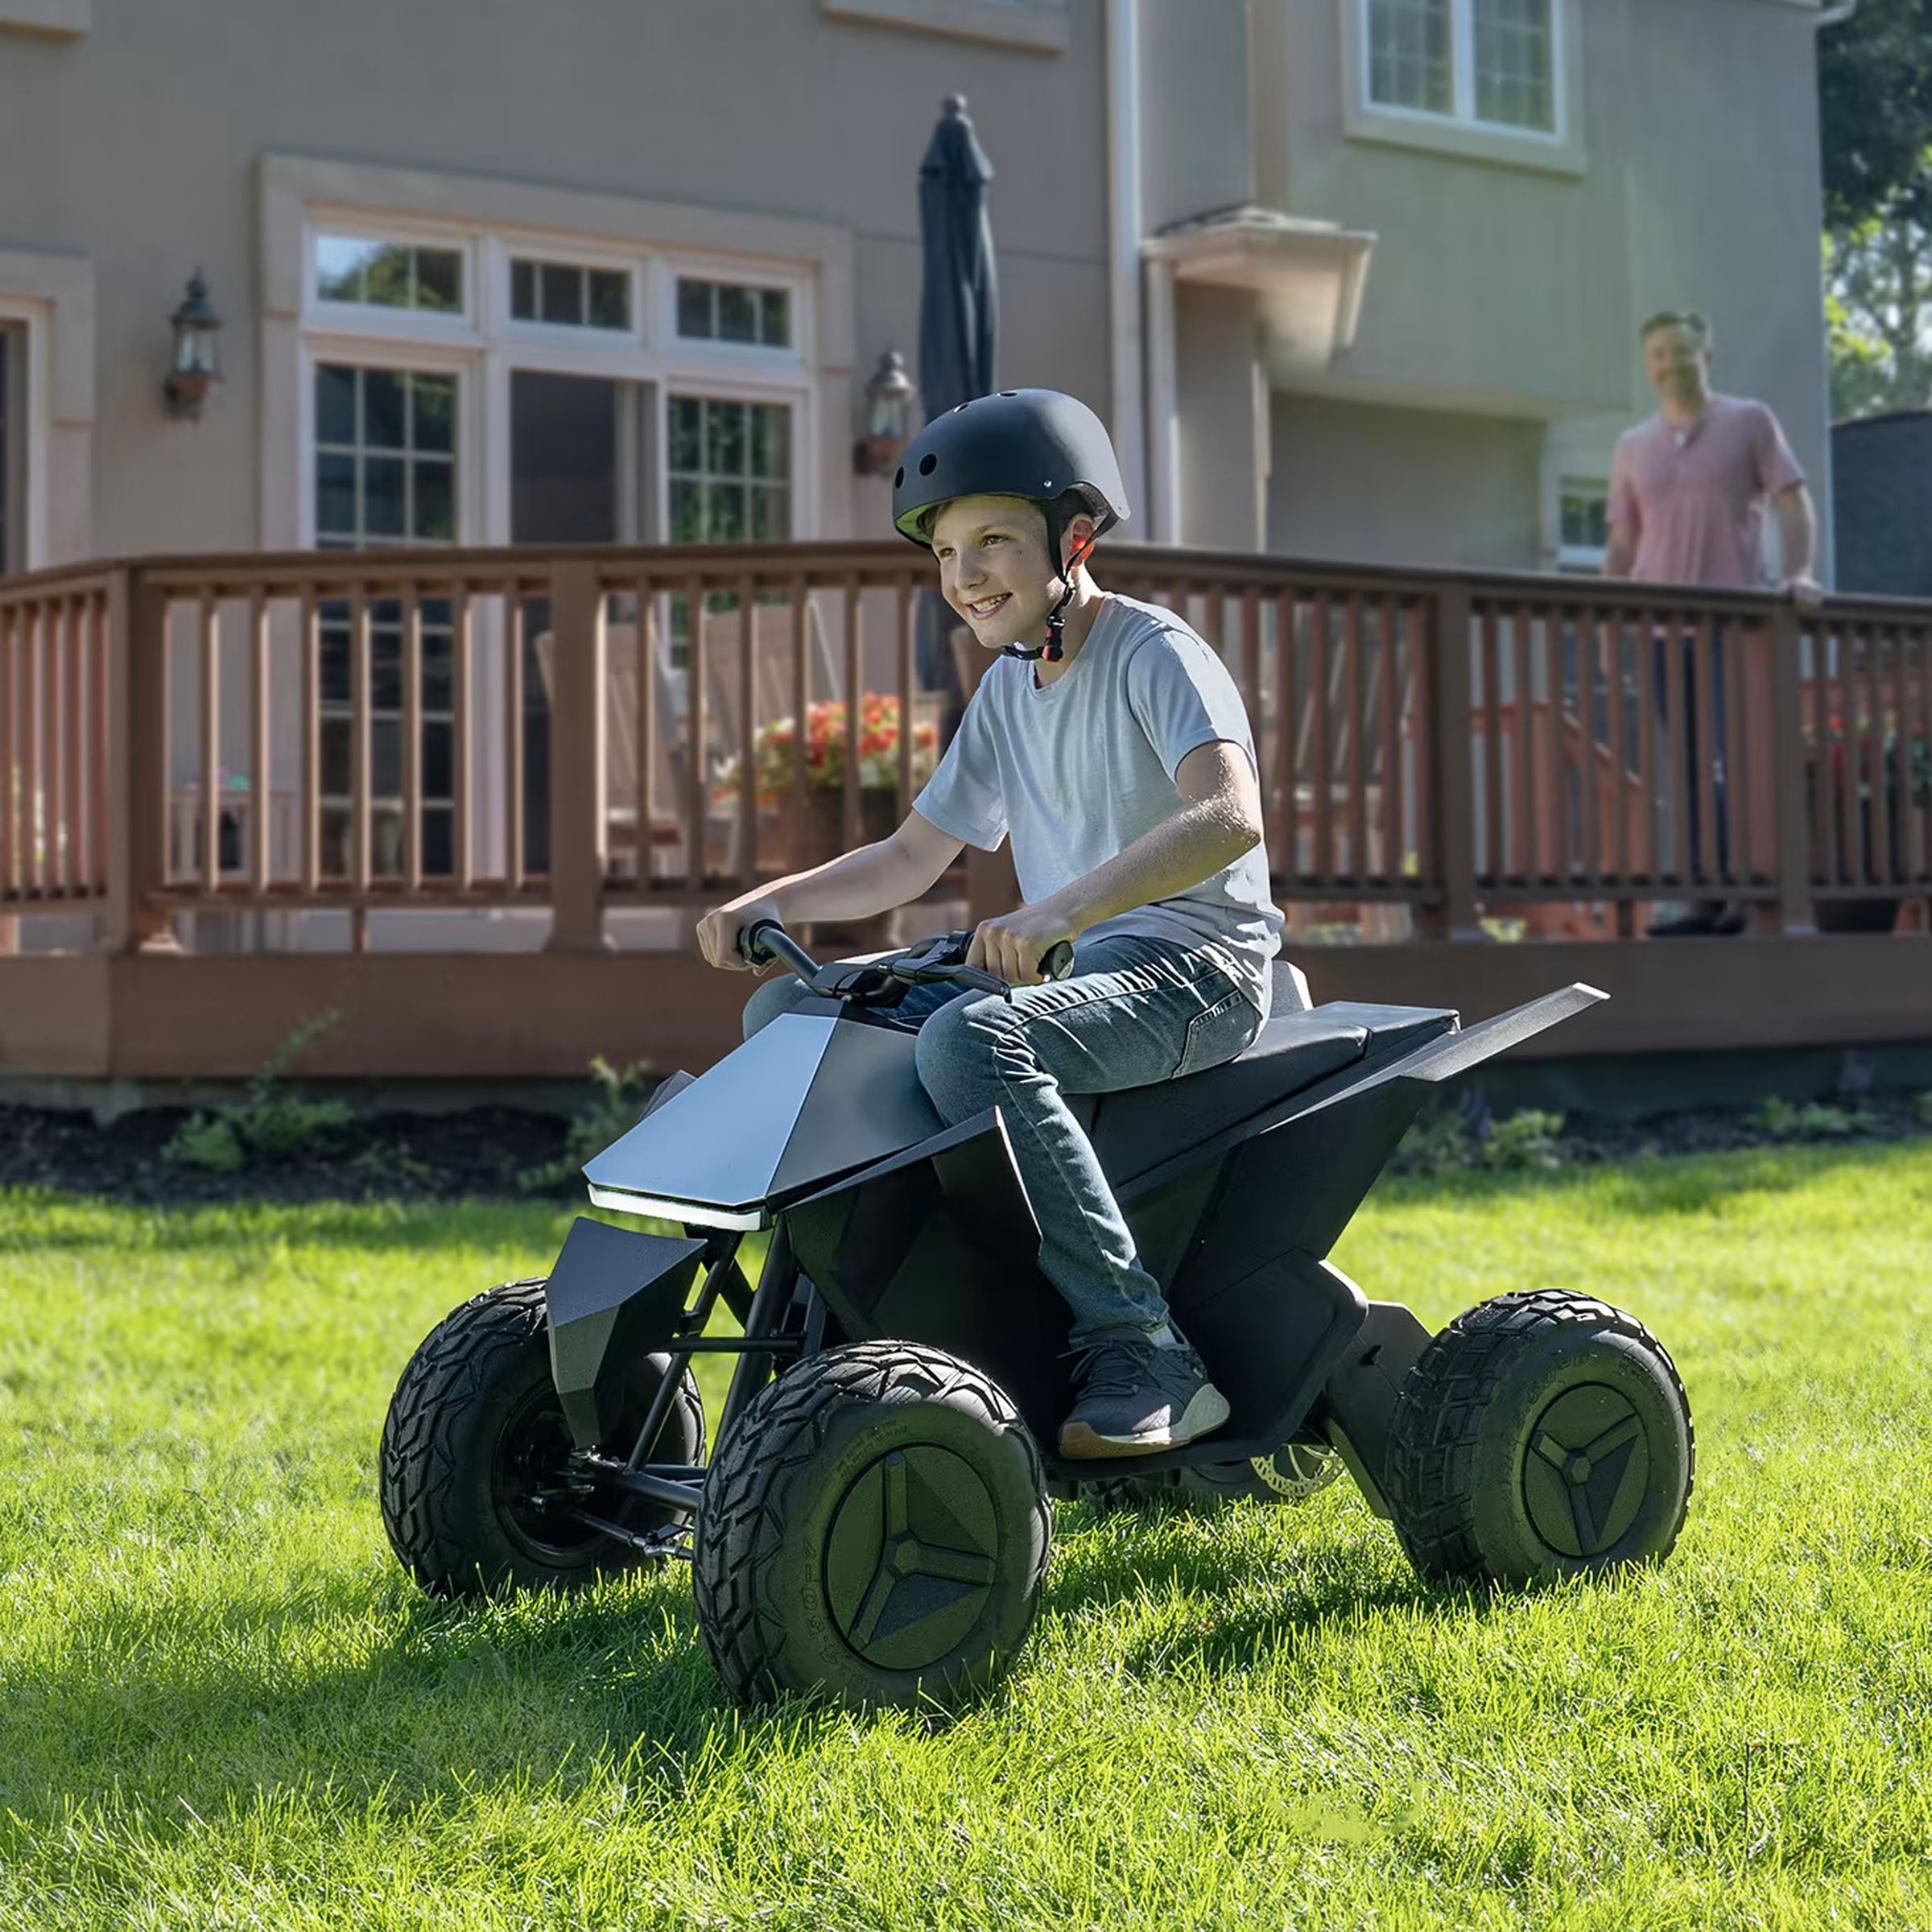 A child riding on a Cyberquad for Kids in a grassy garden.